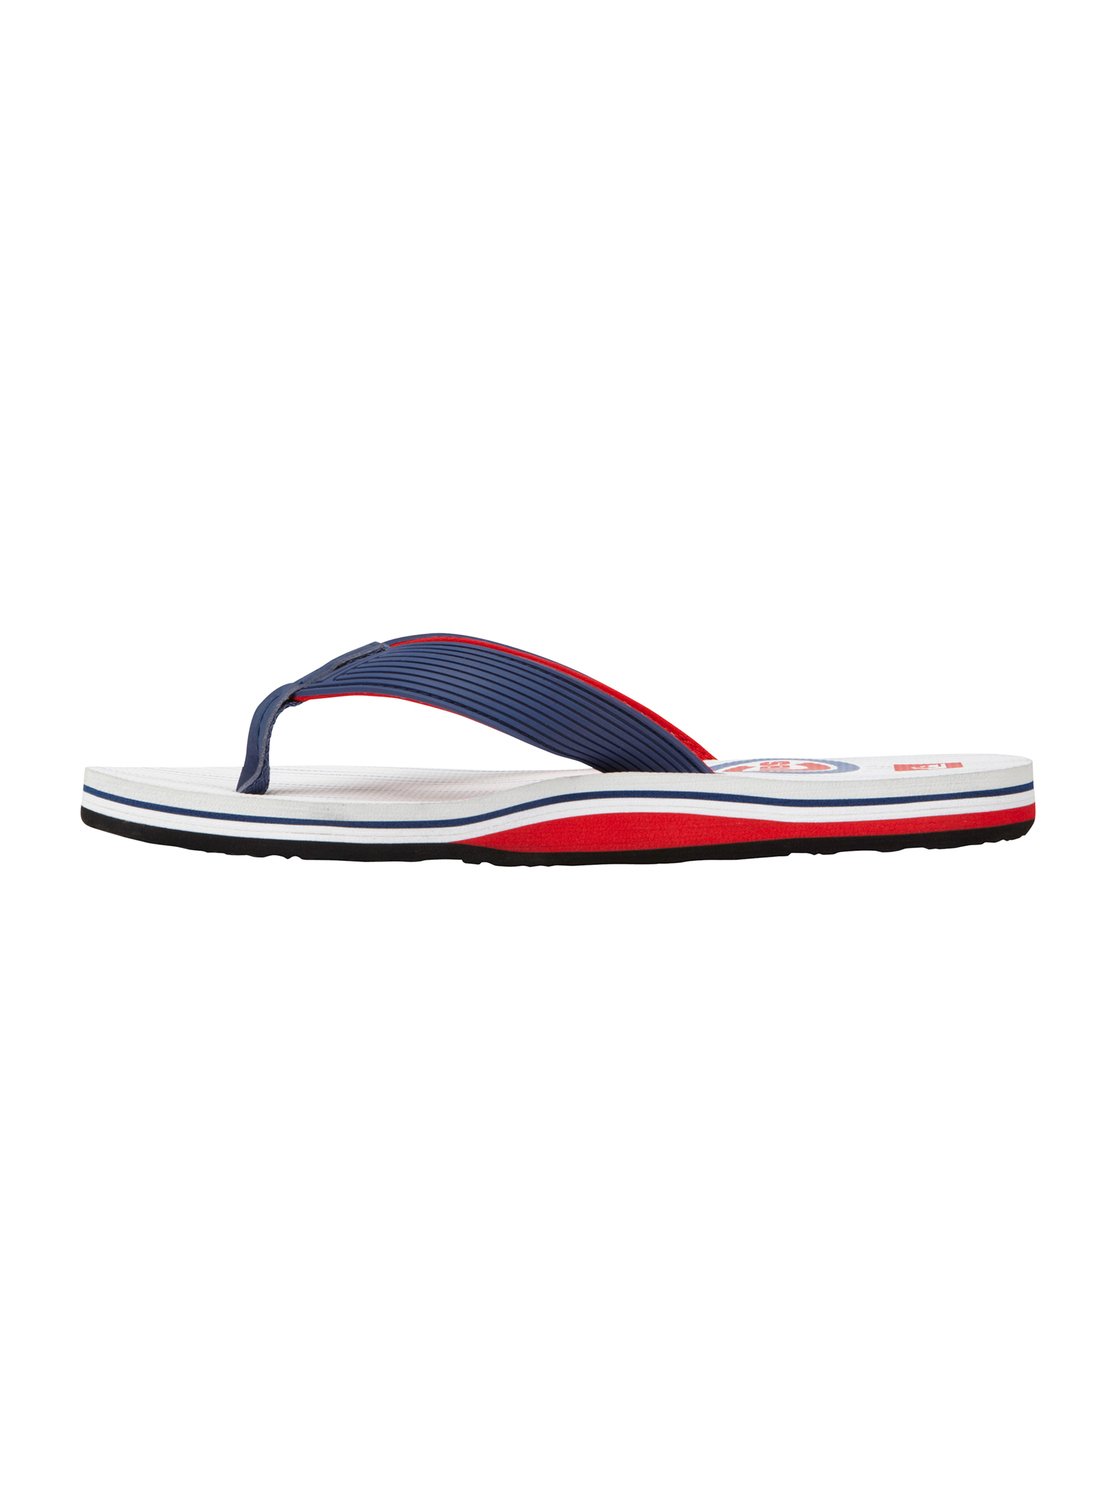 Chicago Cubs MLB Sandals 857448 | Quiksilver